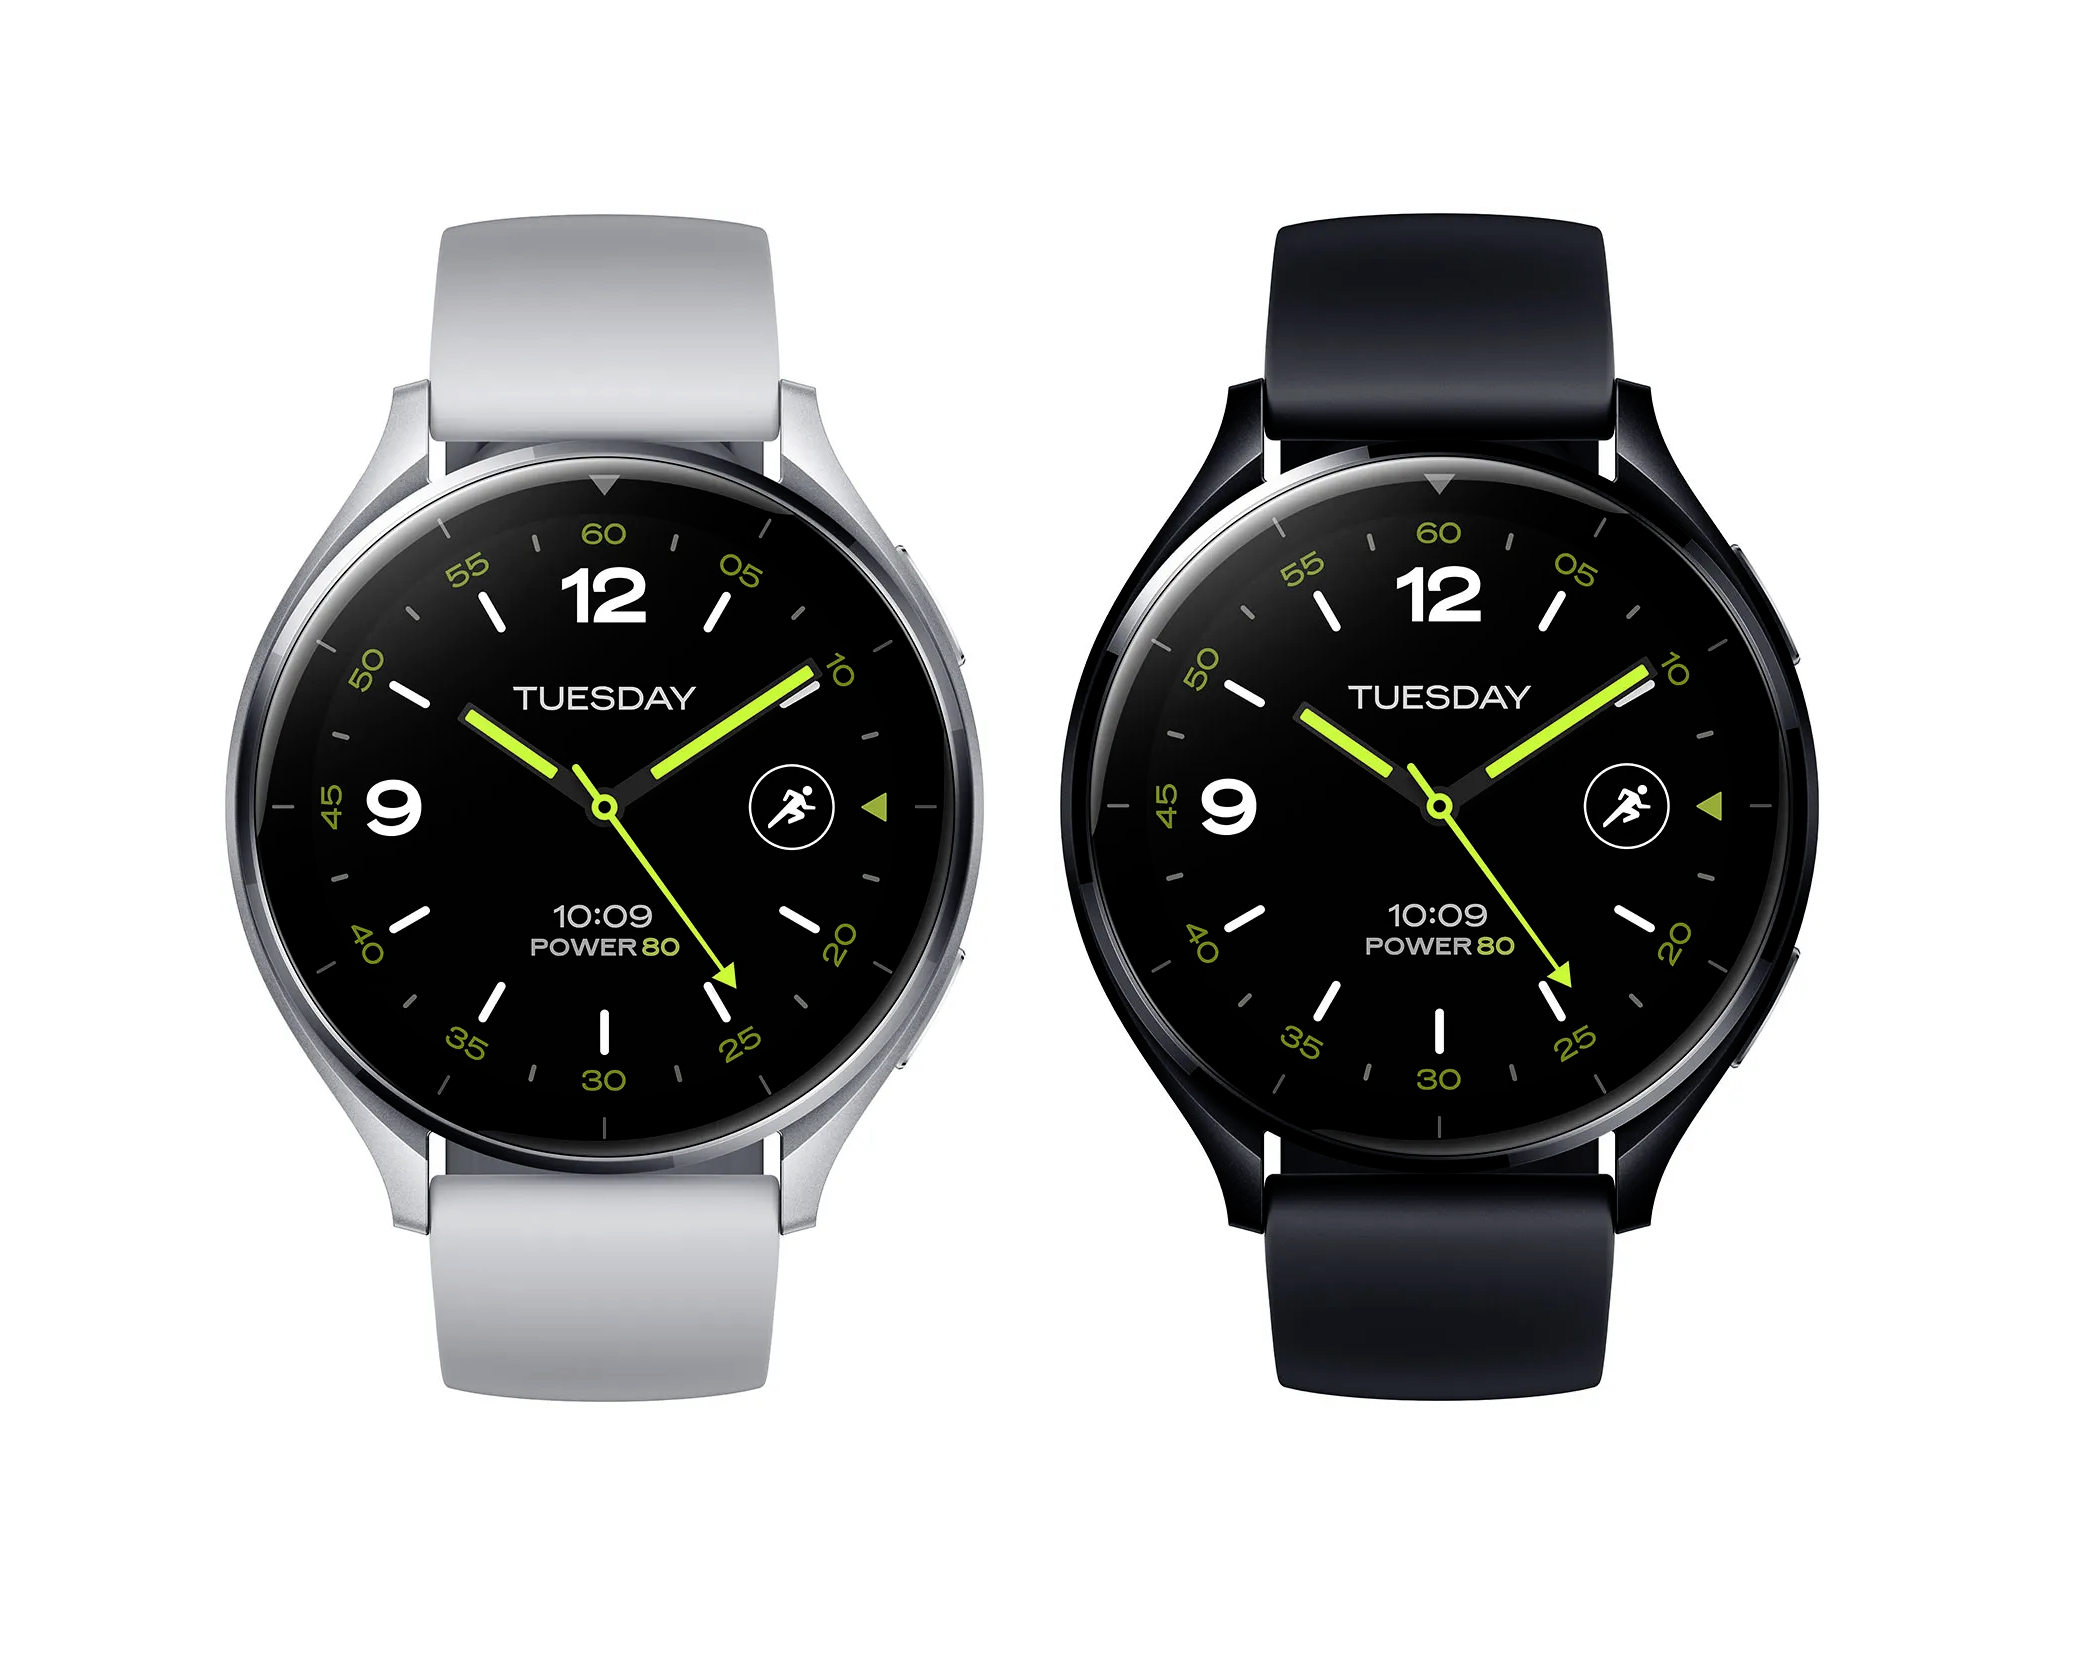 Xiaomi Watch 2 surfaces with Wear OS for half the price of Pixel